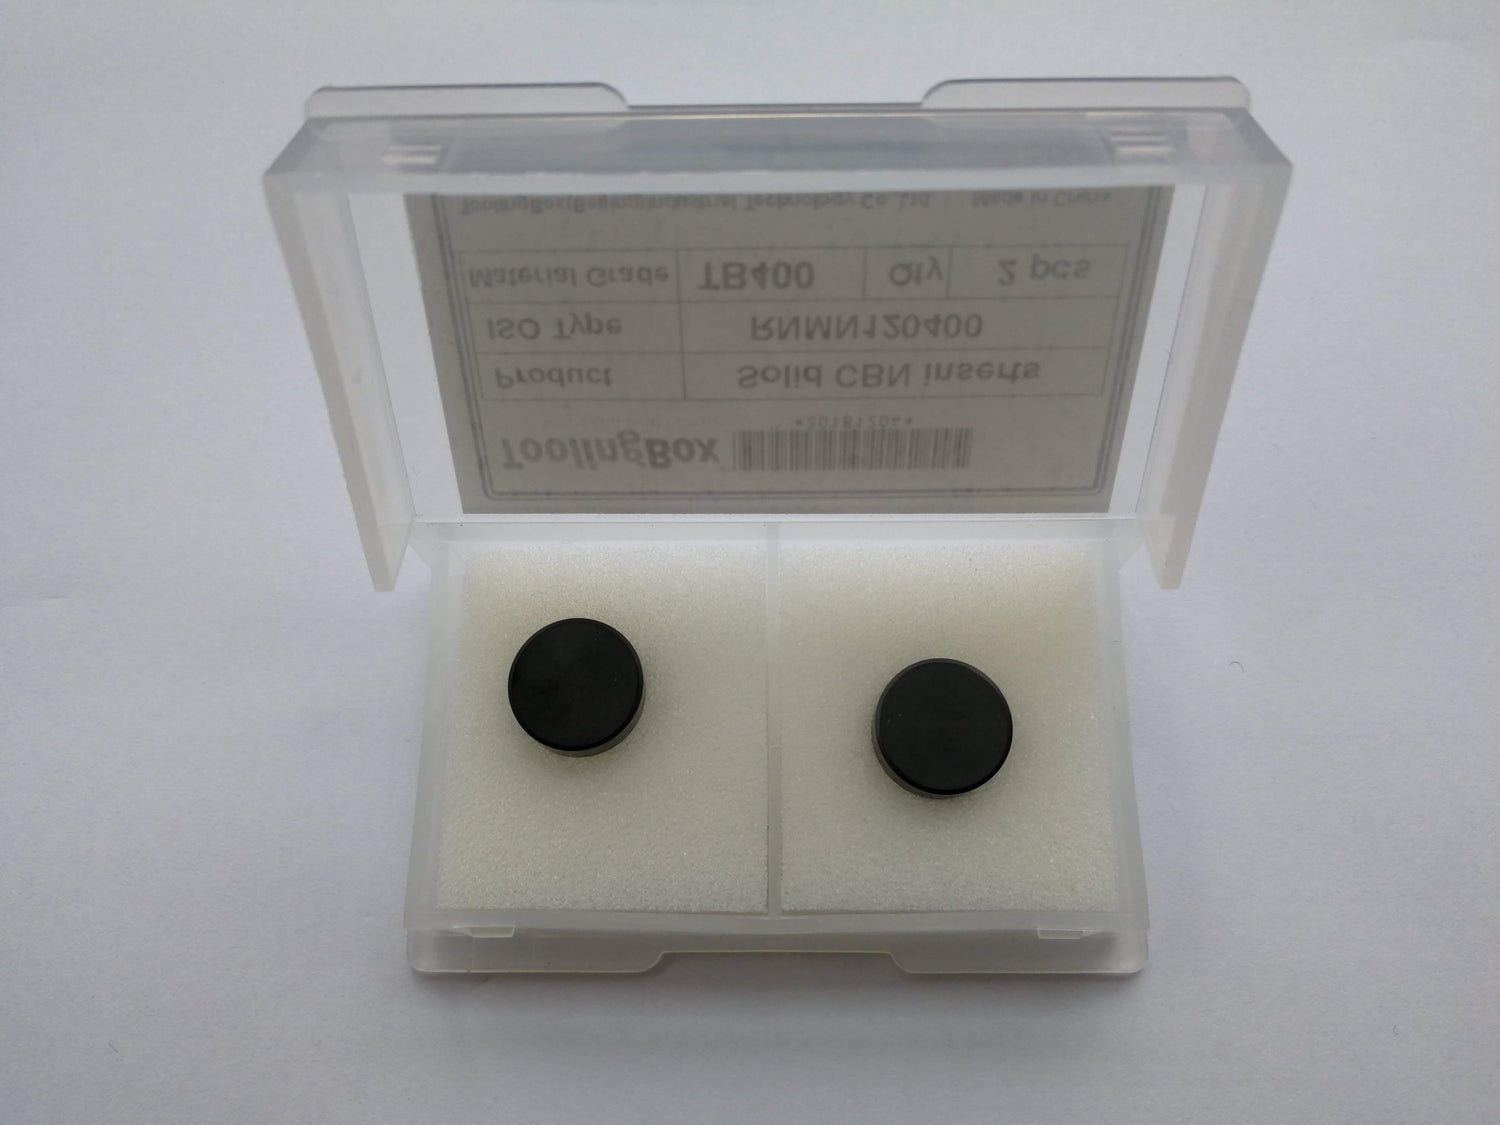 2pcs packing for  Solid CBN insert RNMN090300 TB400